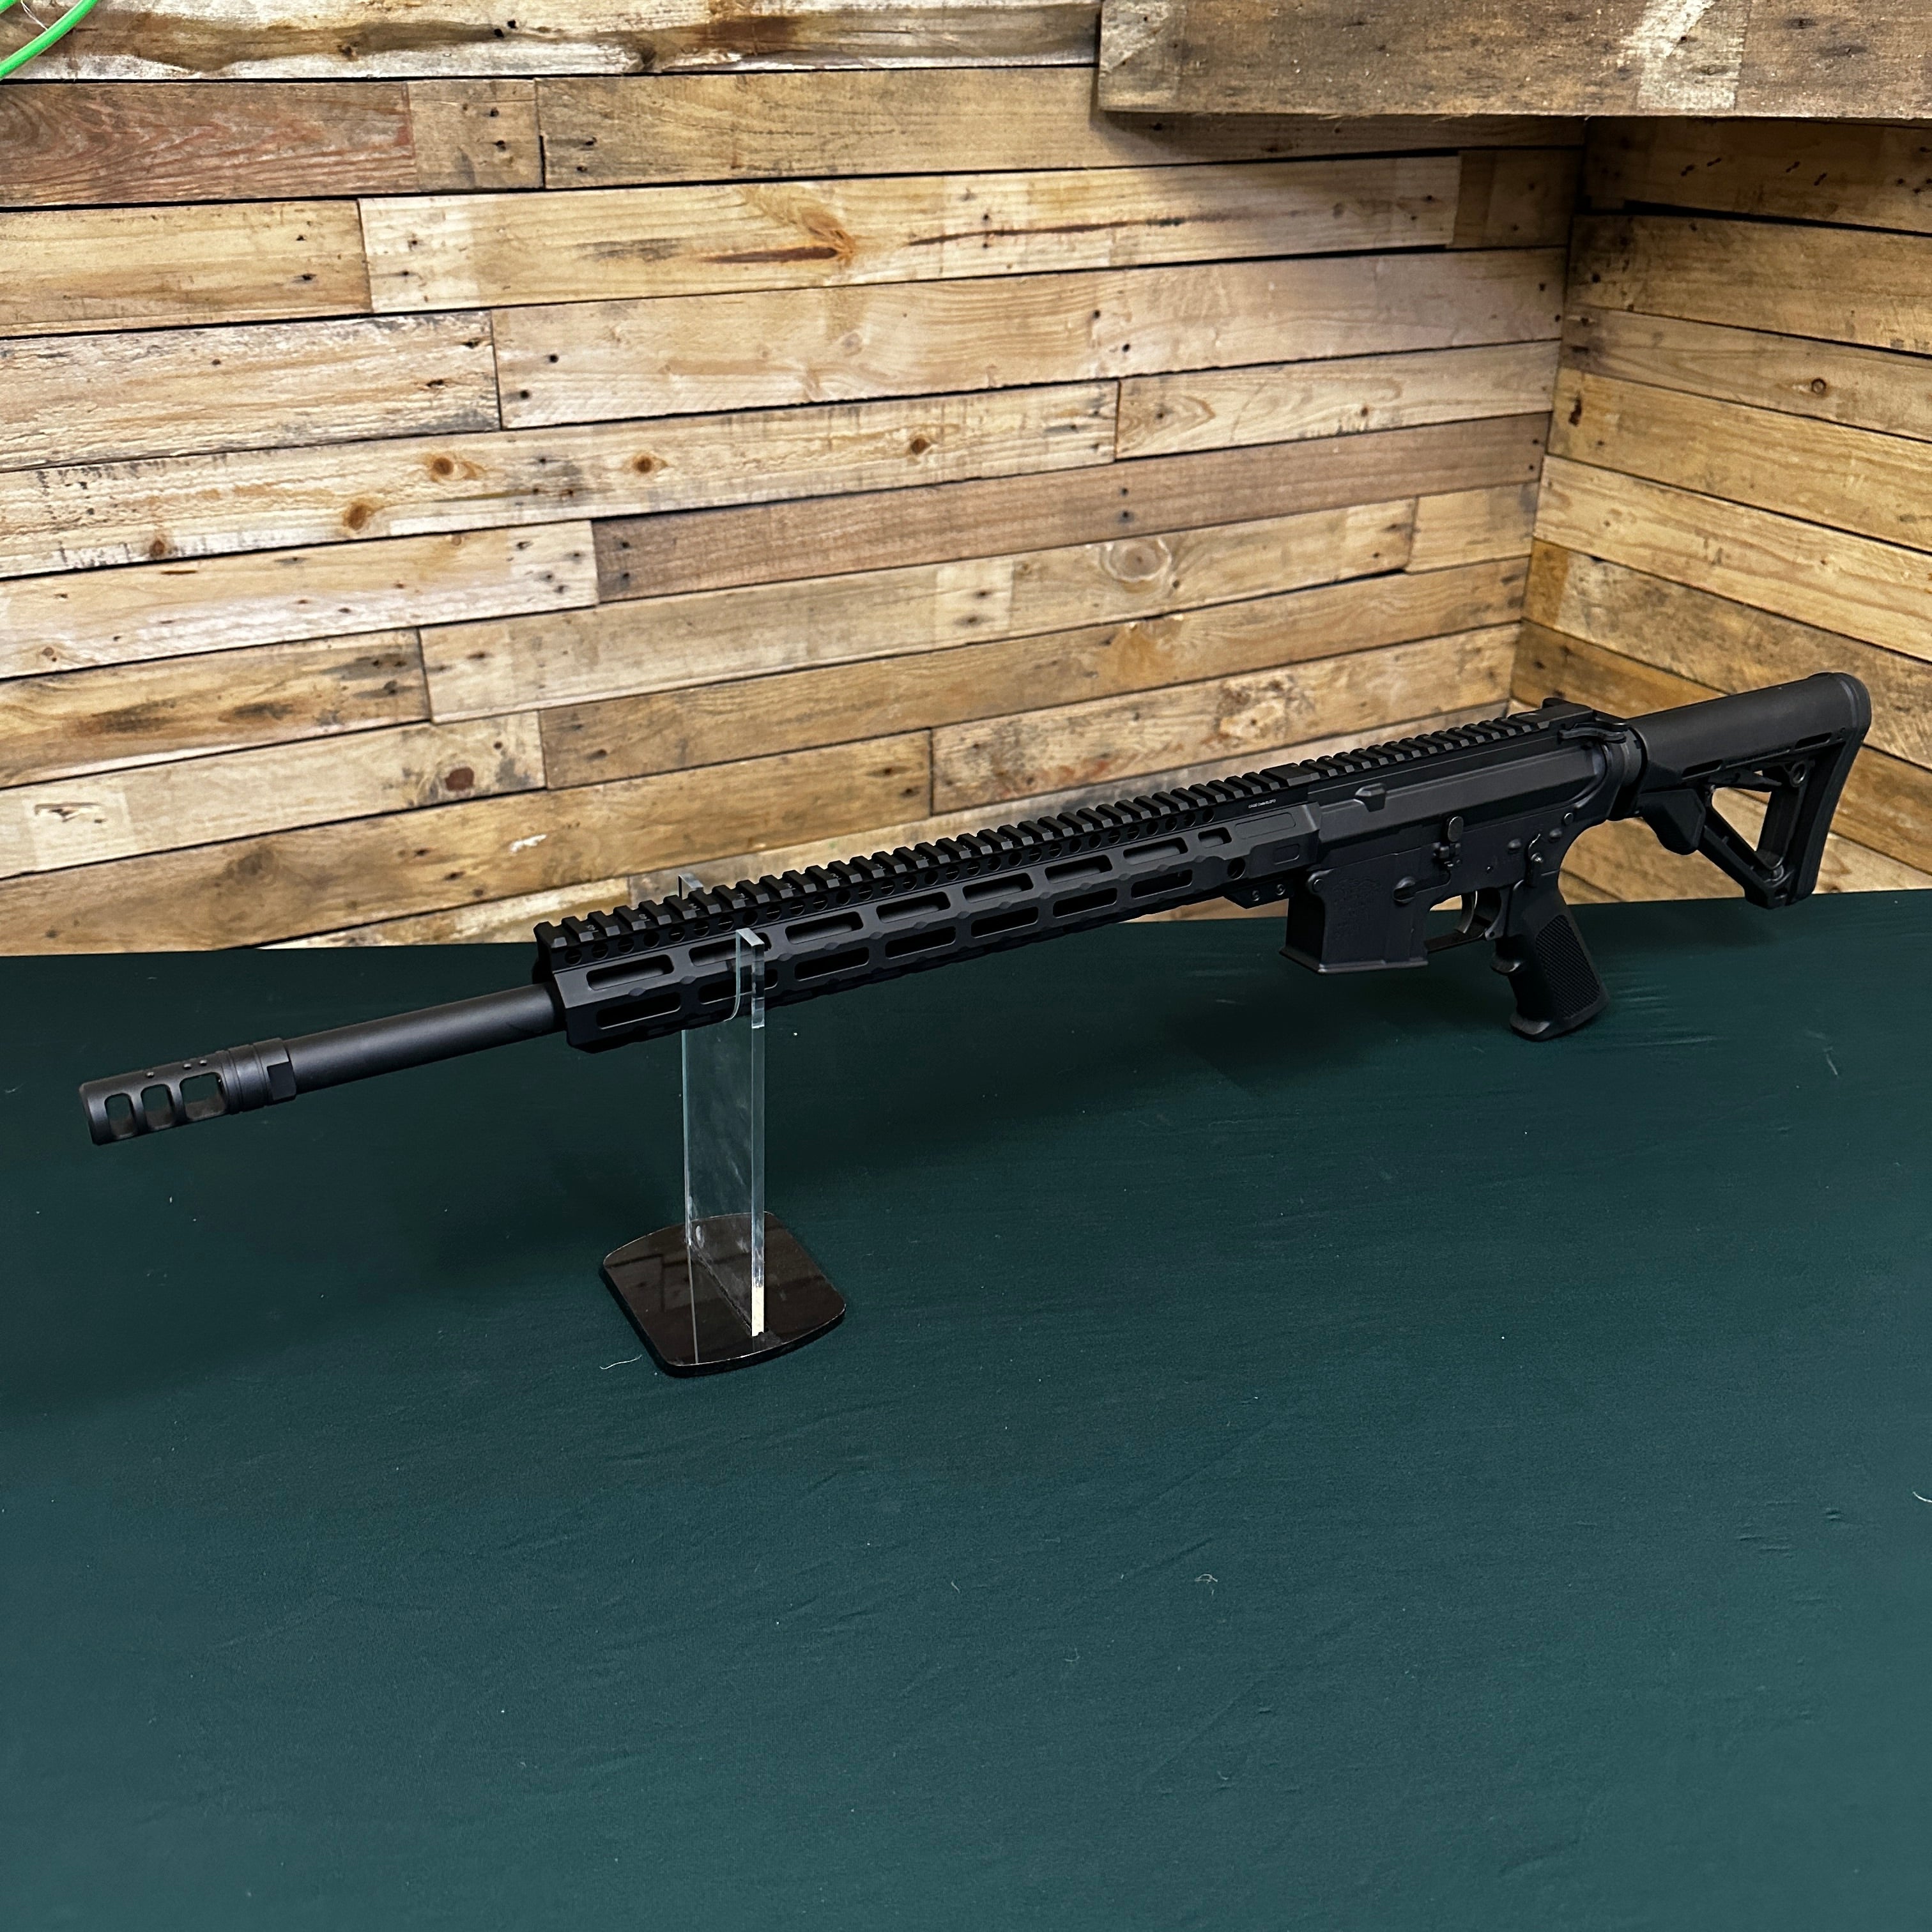 Valkyrie Rifles AR15 Straightpull 18" Barrel - Contact to Purchase